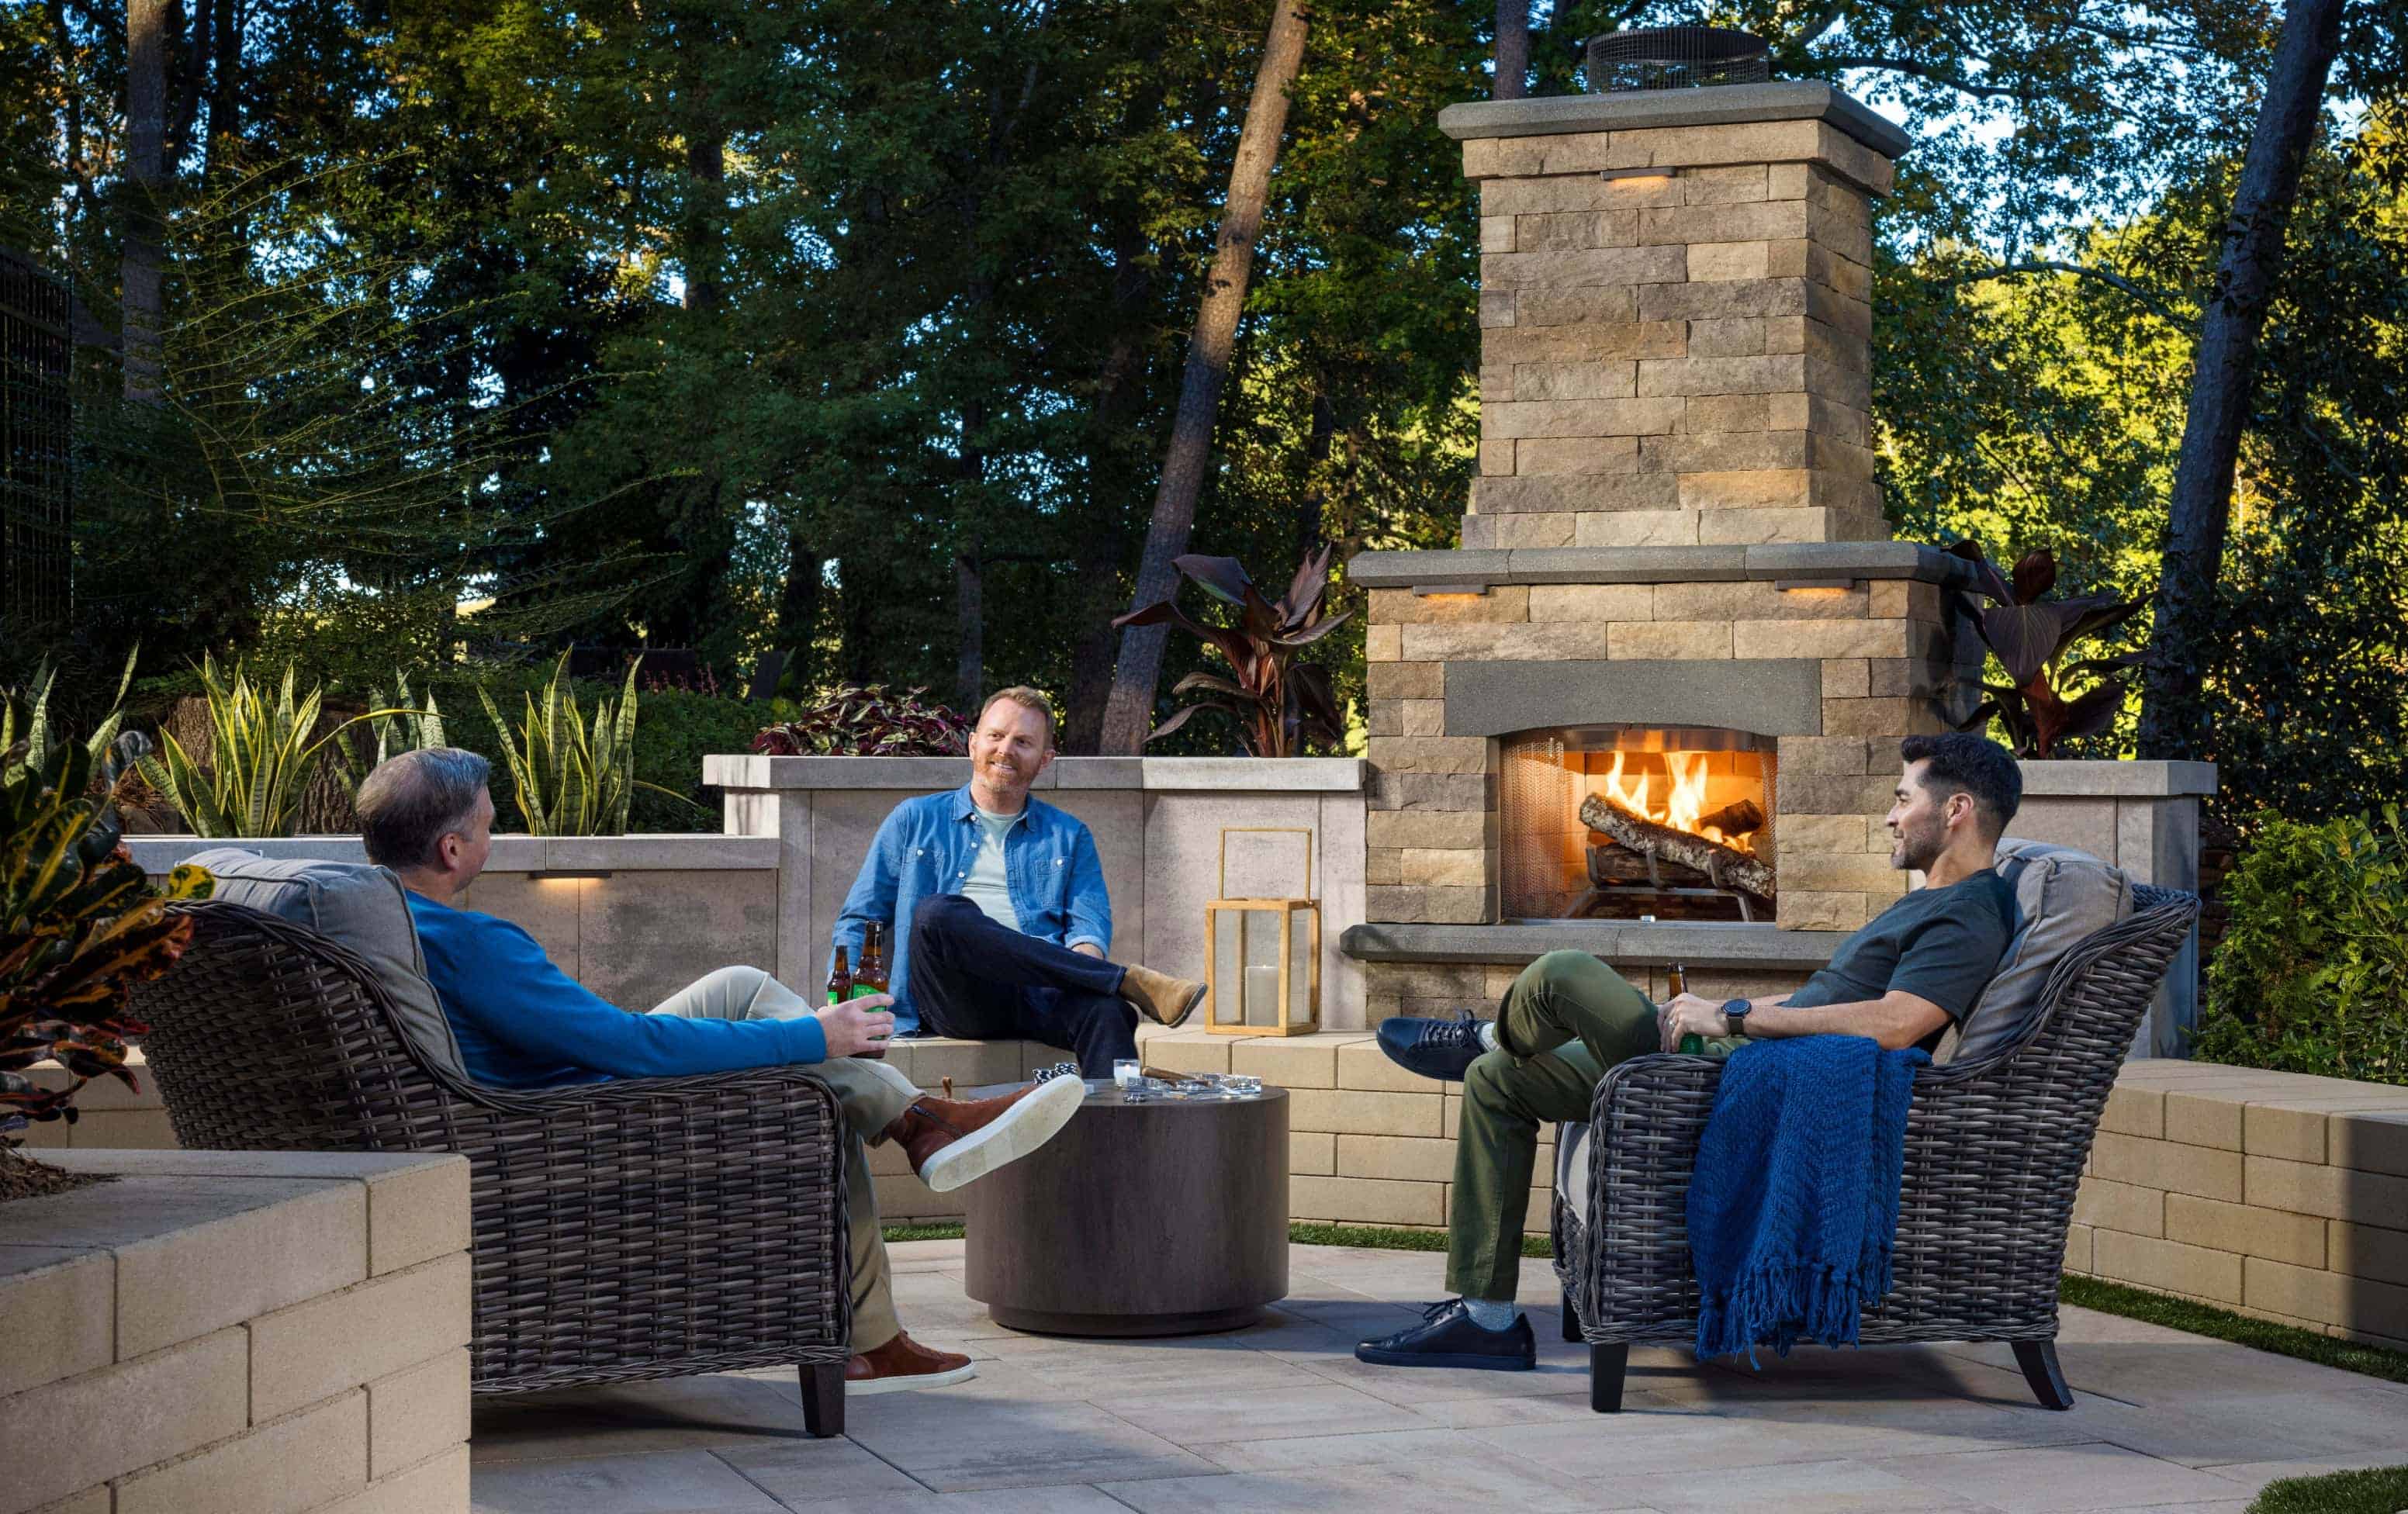 Three people relaxing in an outdoor living room